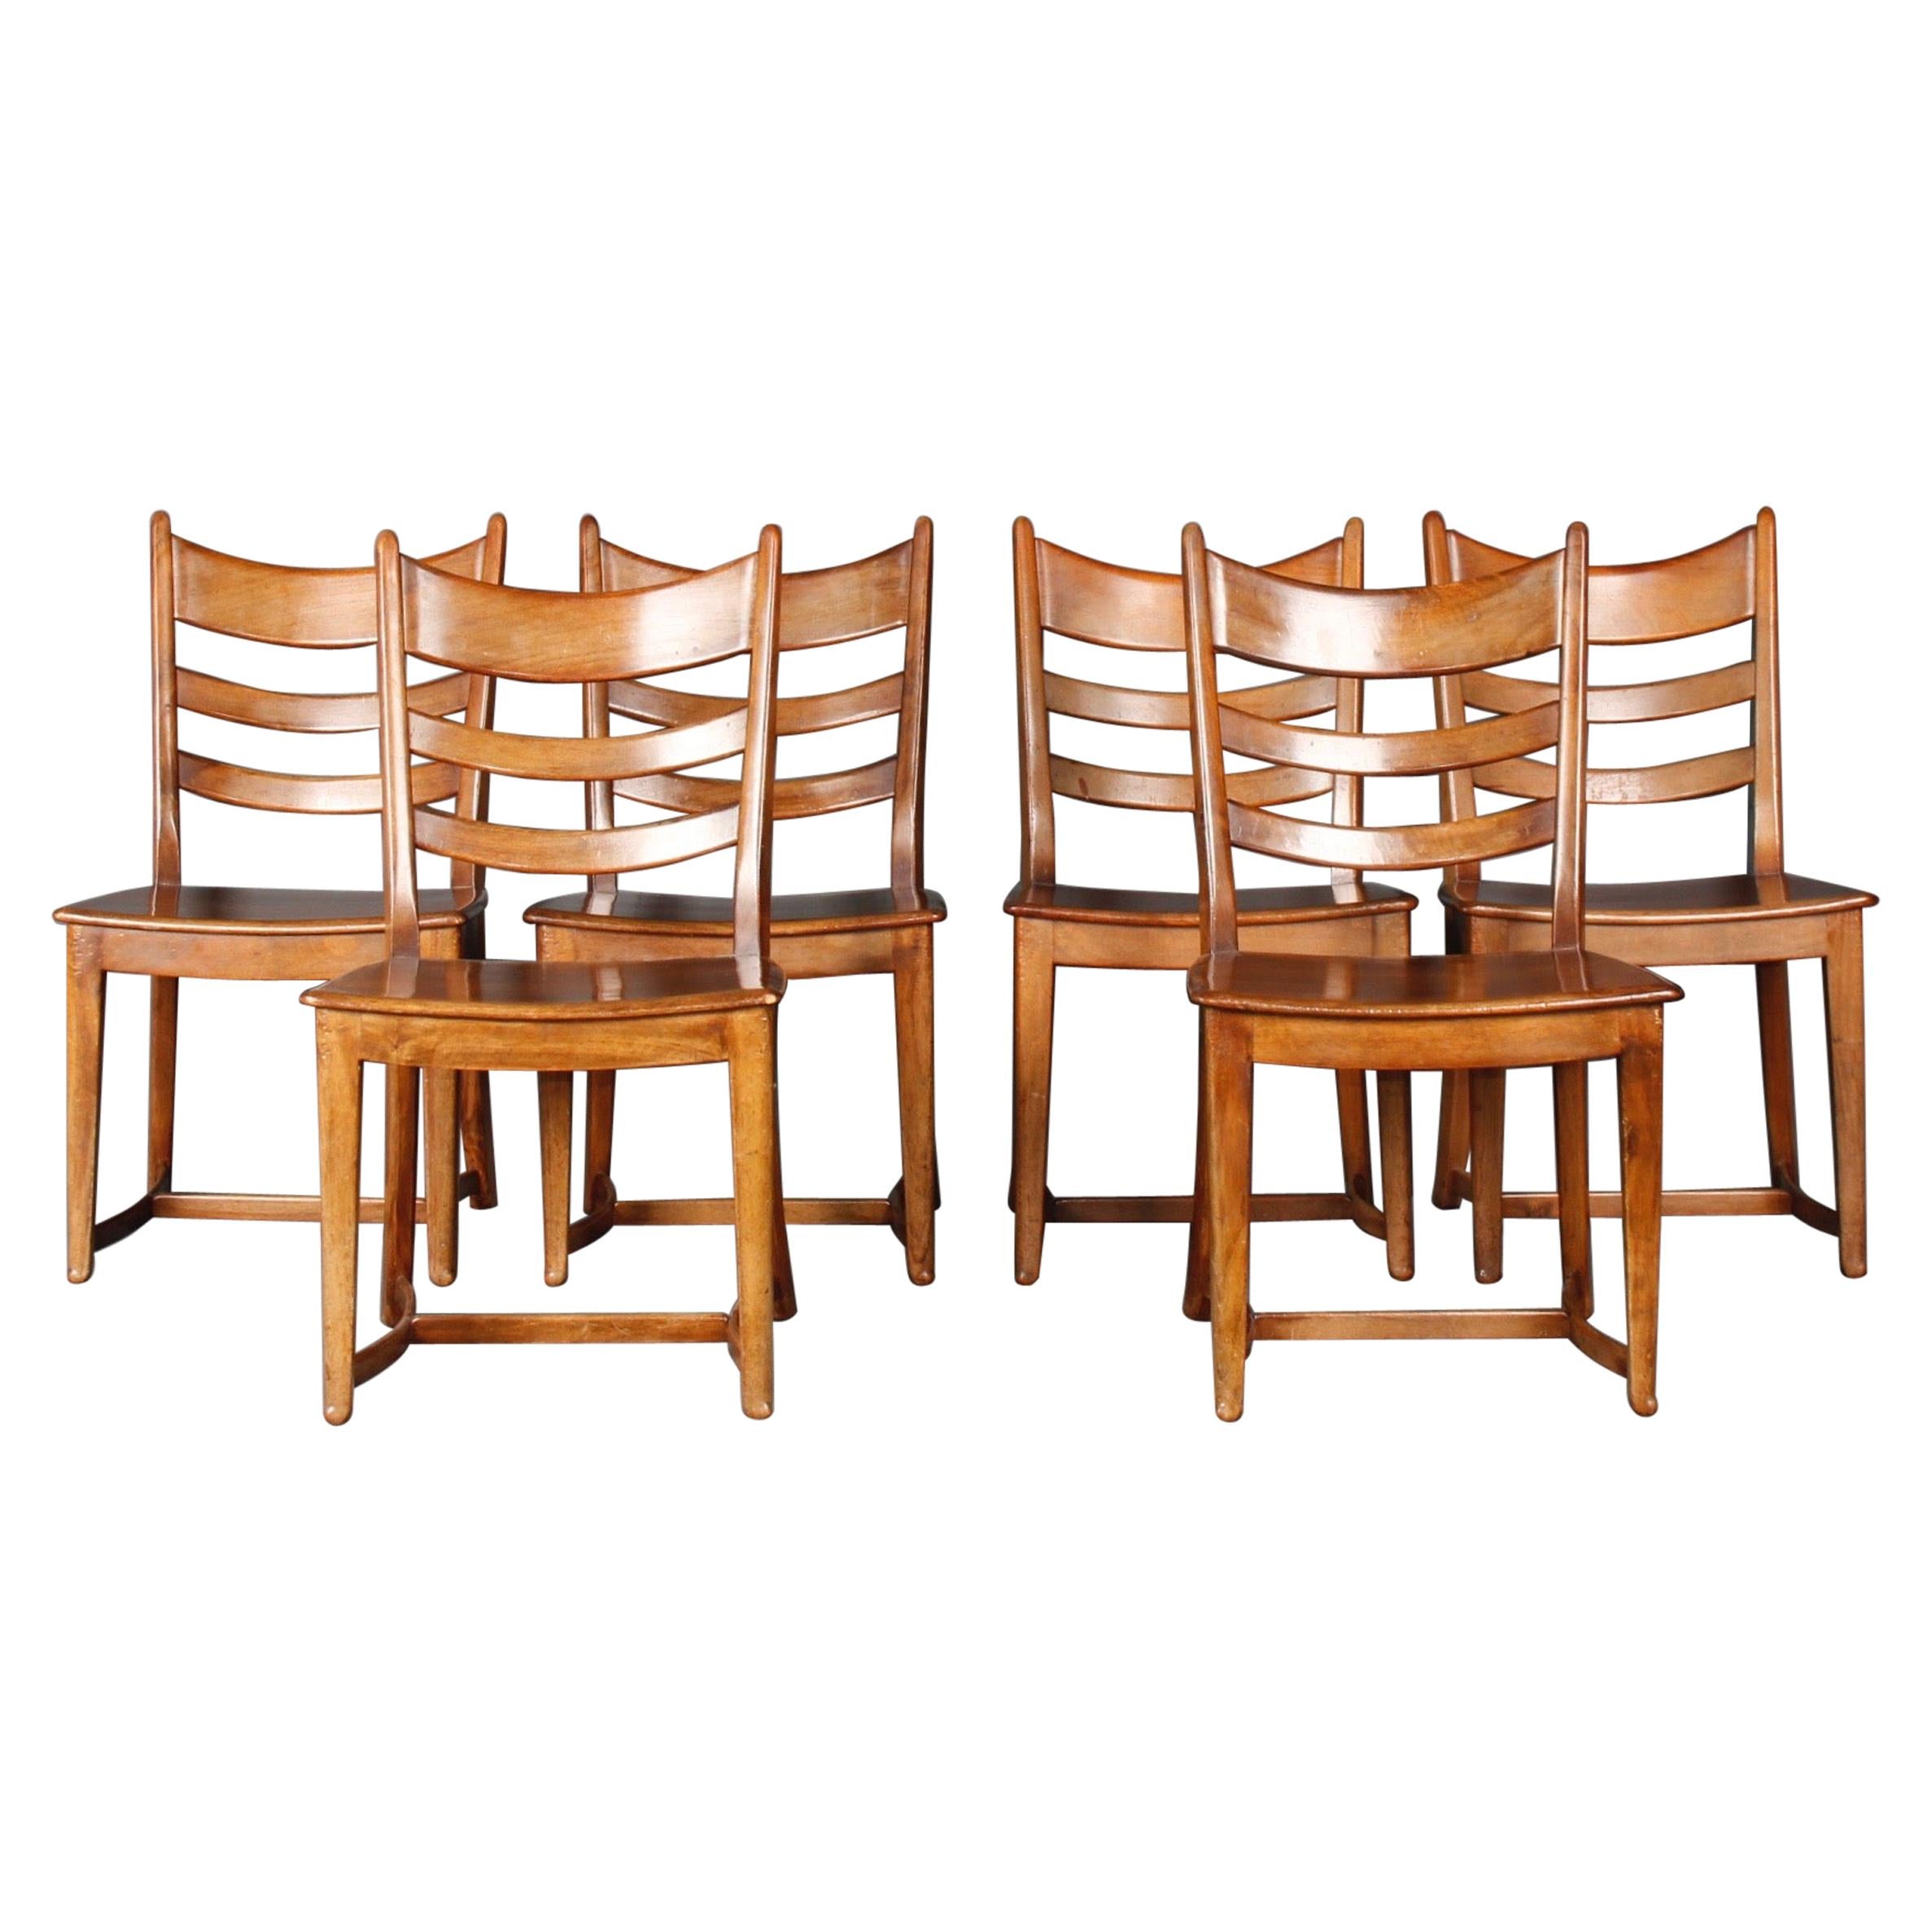 Set of 6 Franz Xaver Sproll Chairs